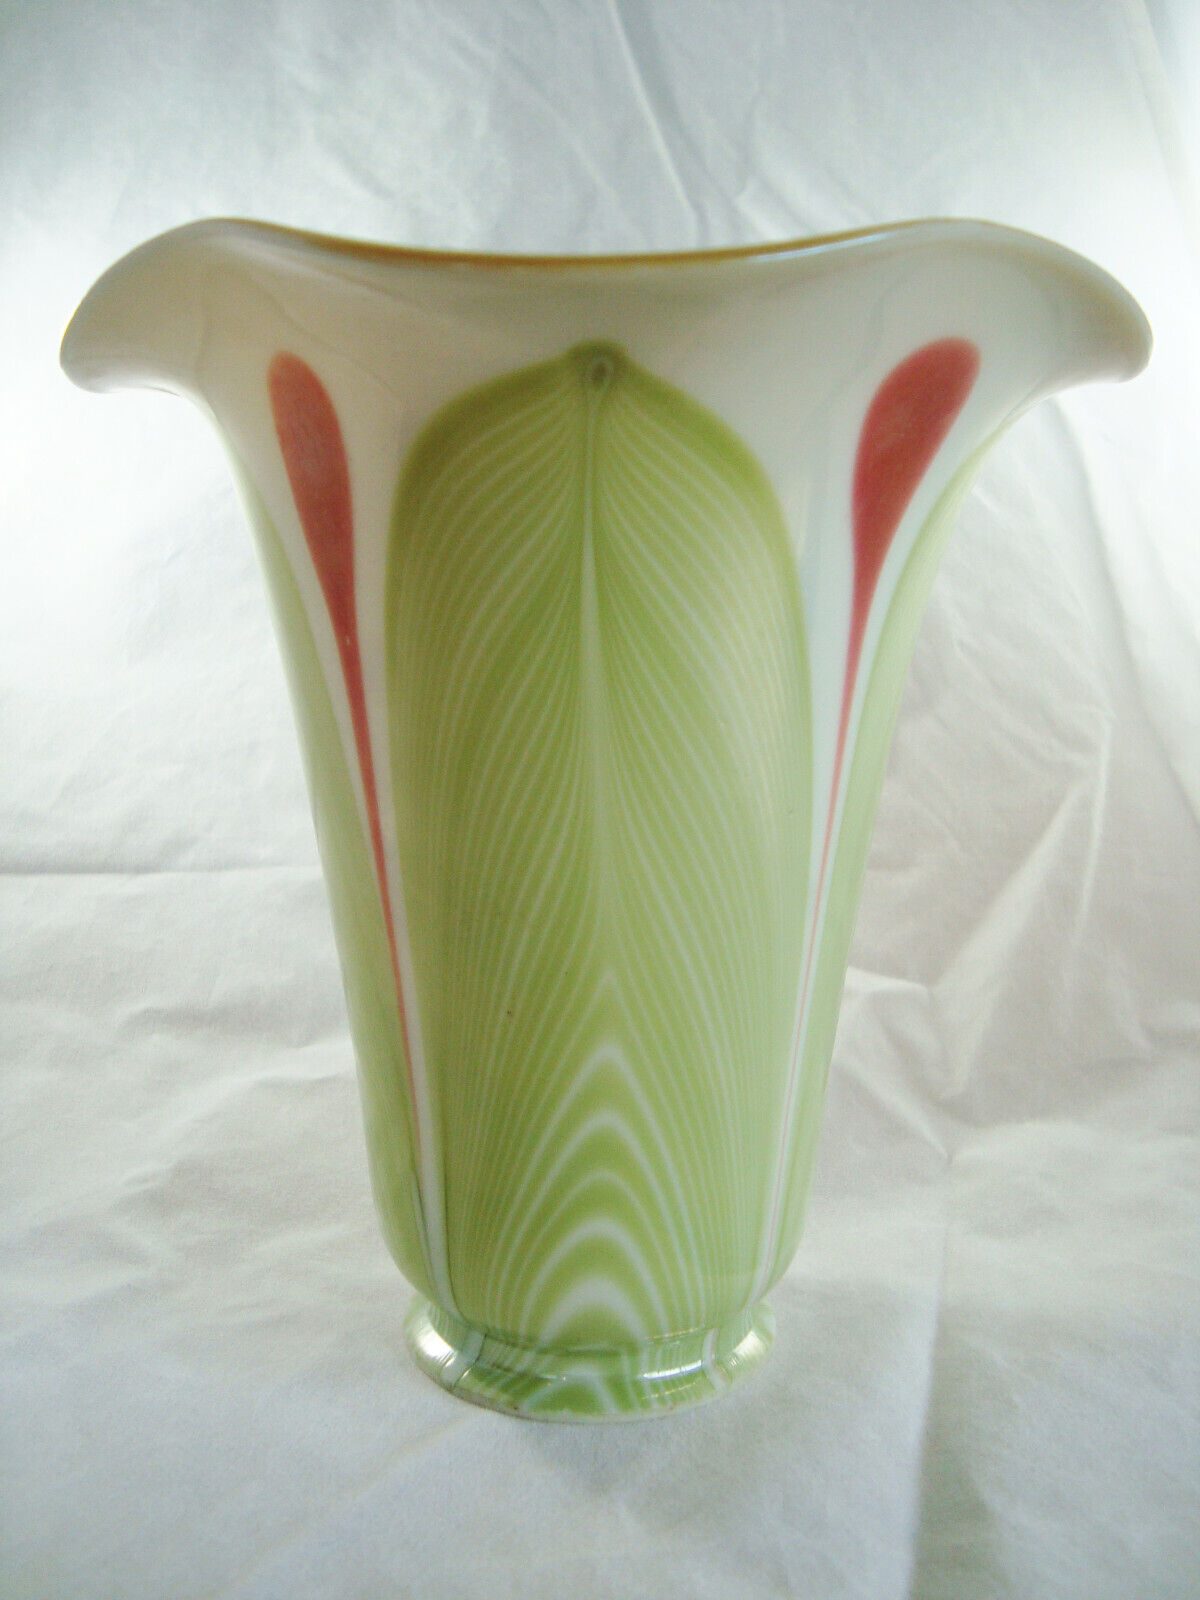 Loetz Ivory PG 5723 Lampshade Antique Art Nouveau Pulled Thread Hand Blown Glass